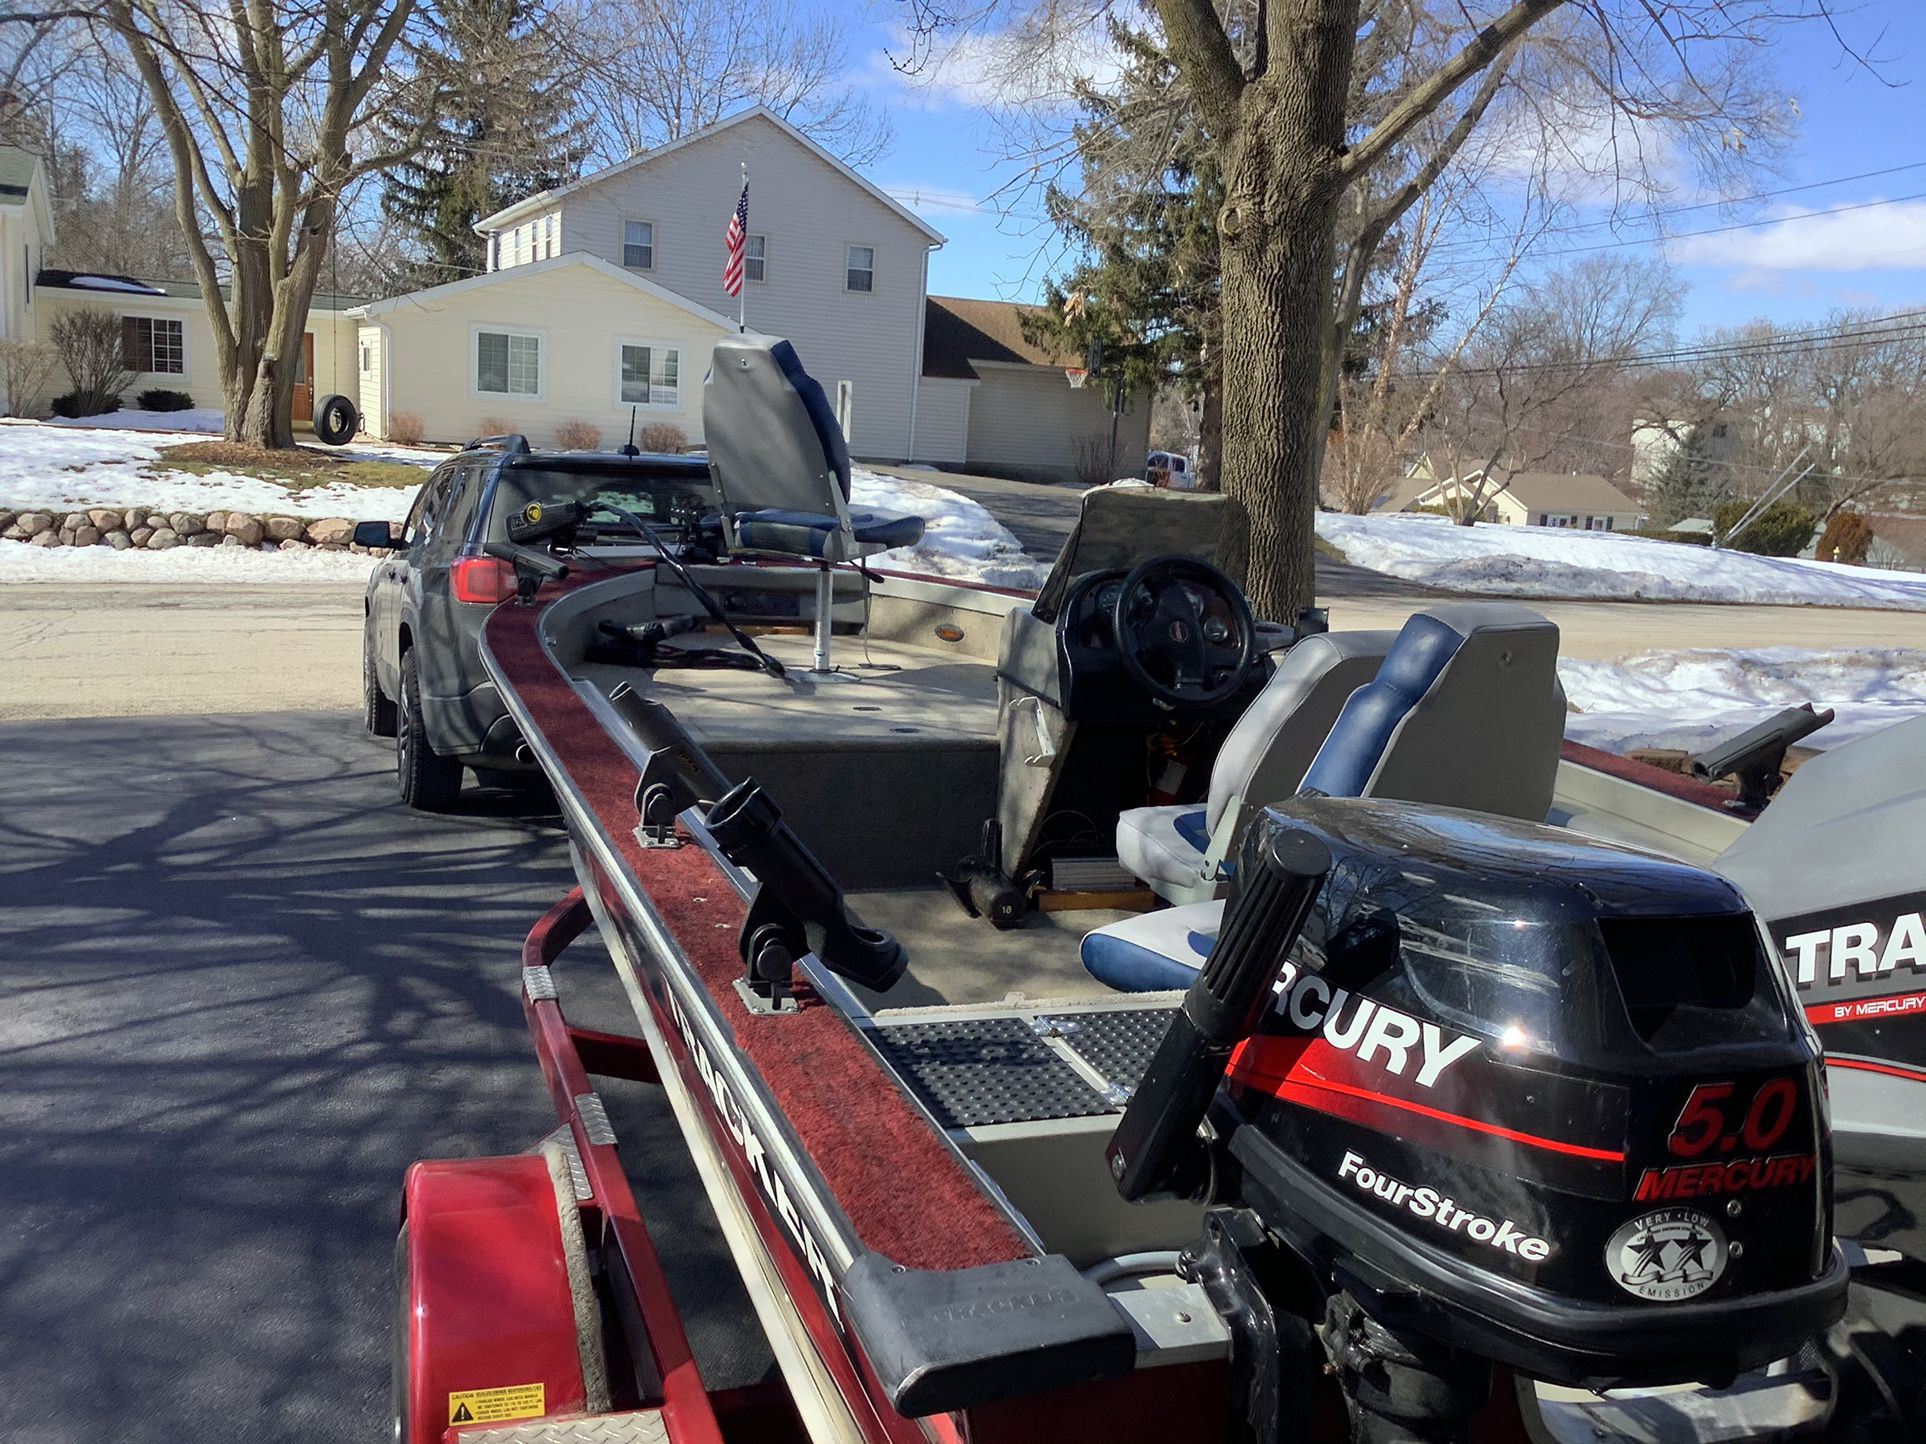 17DVSC with 60 ELPTO 1997 Tracker with a 2010 Phoenix Trailer for Sale ...